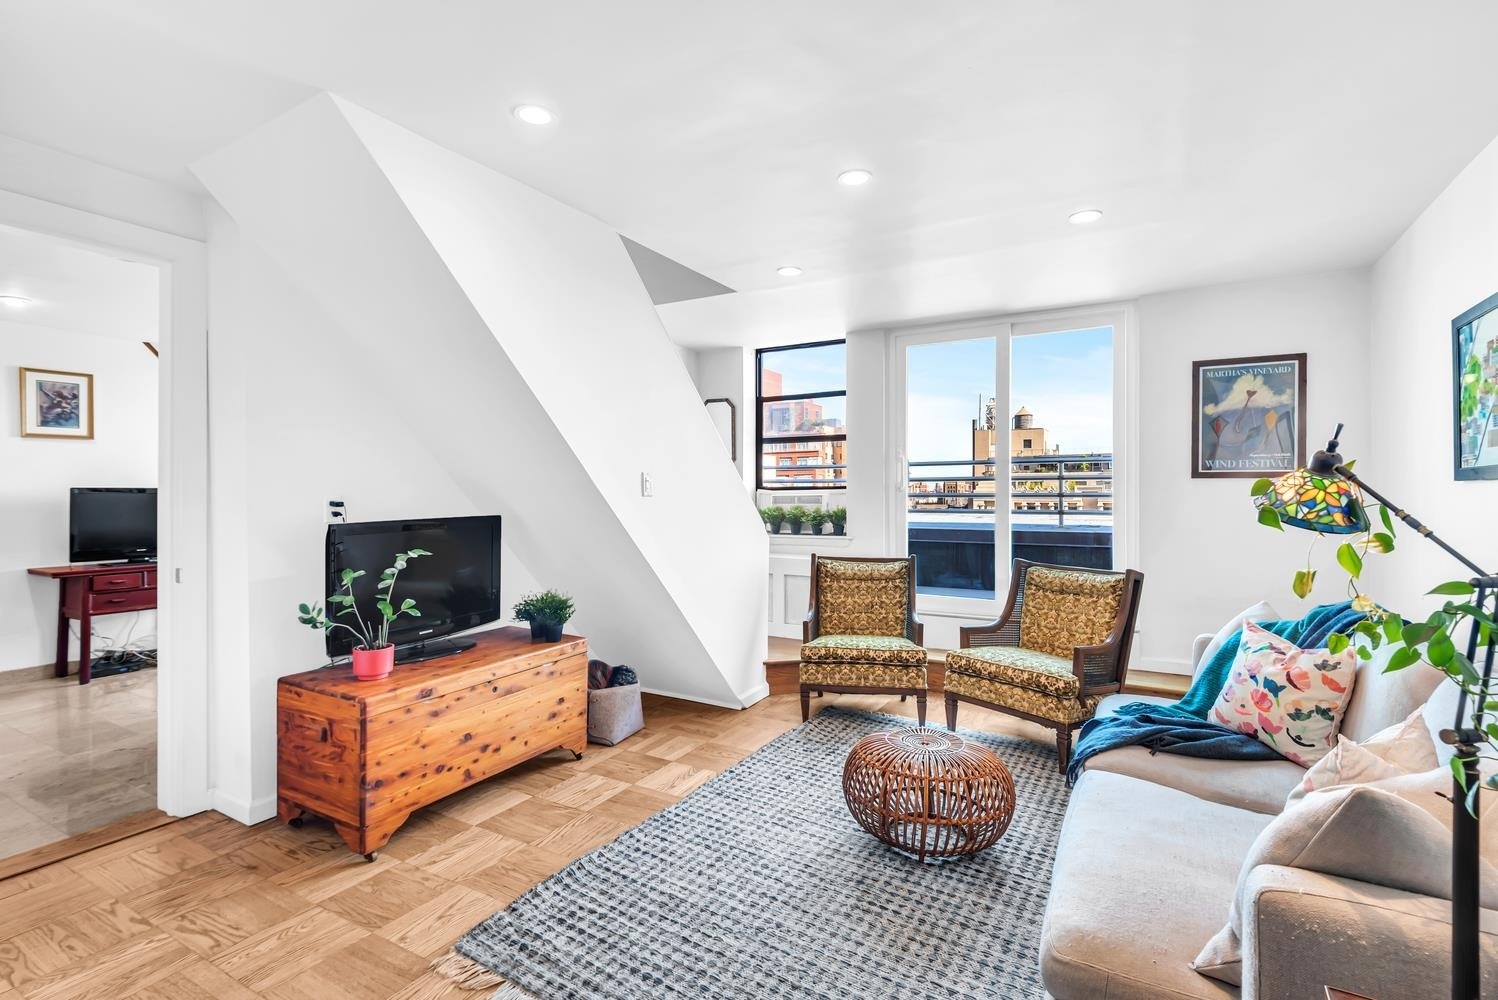 Property at Lincoln Spencer, 140 W 69TH ST, PH8PH9 Lincoln Square, New York, New York 10023